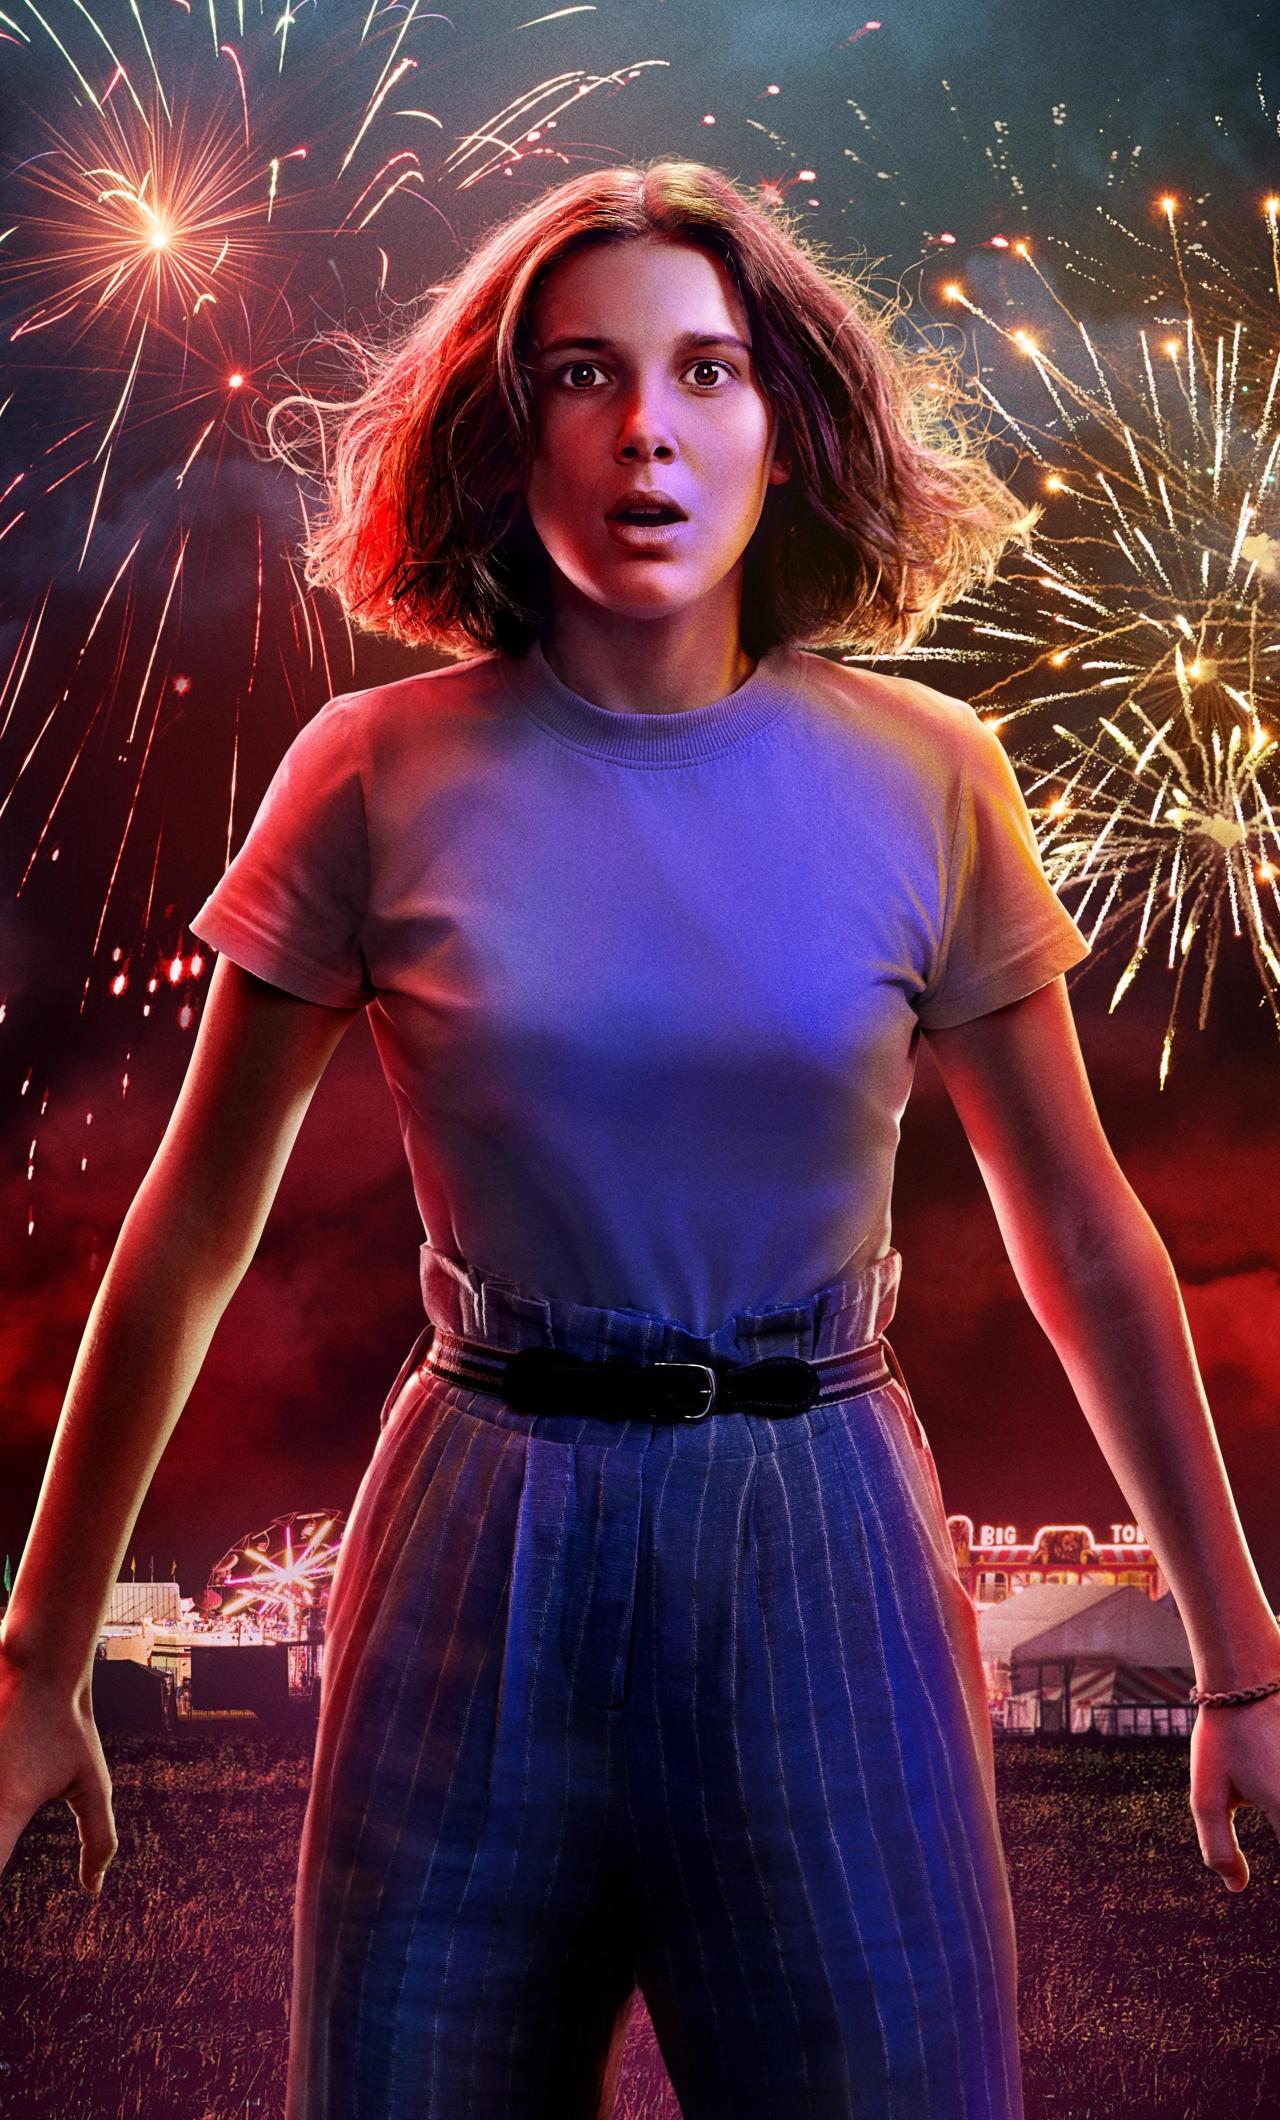 Millie Bobby Brown As Eleven Stranger Things 3 Poster